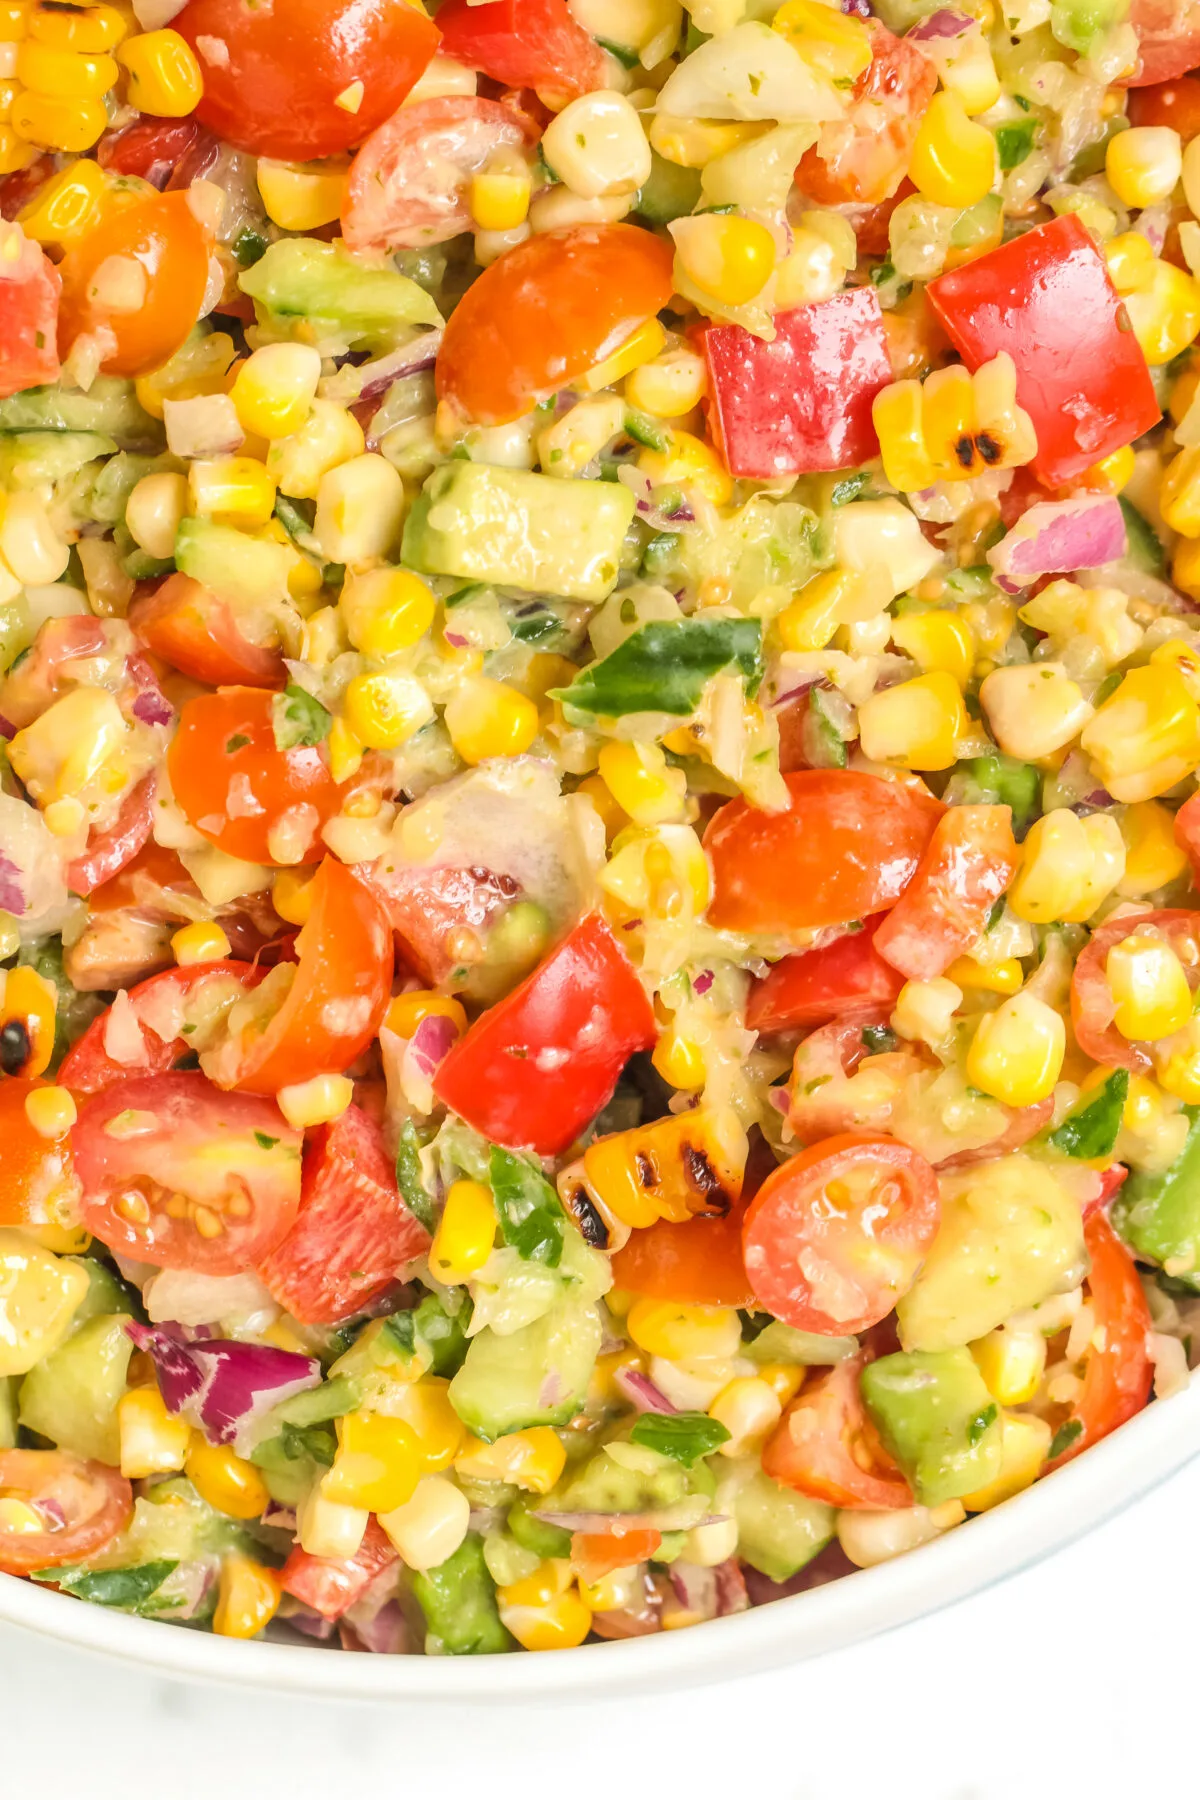 Looking for a new and delicious salad recipe? Look no further than this grilled corn salad! It's perfect for summer BBQs or potlucks.